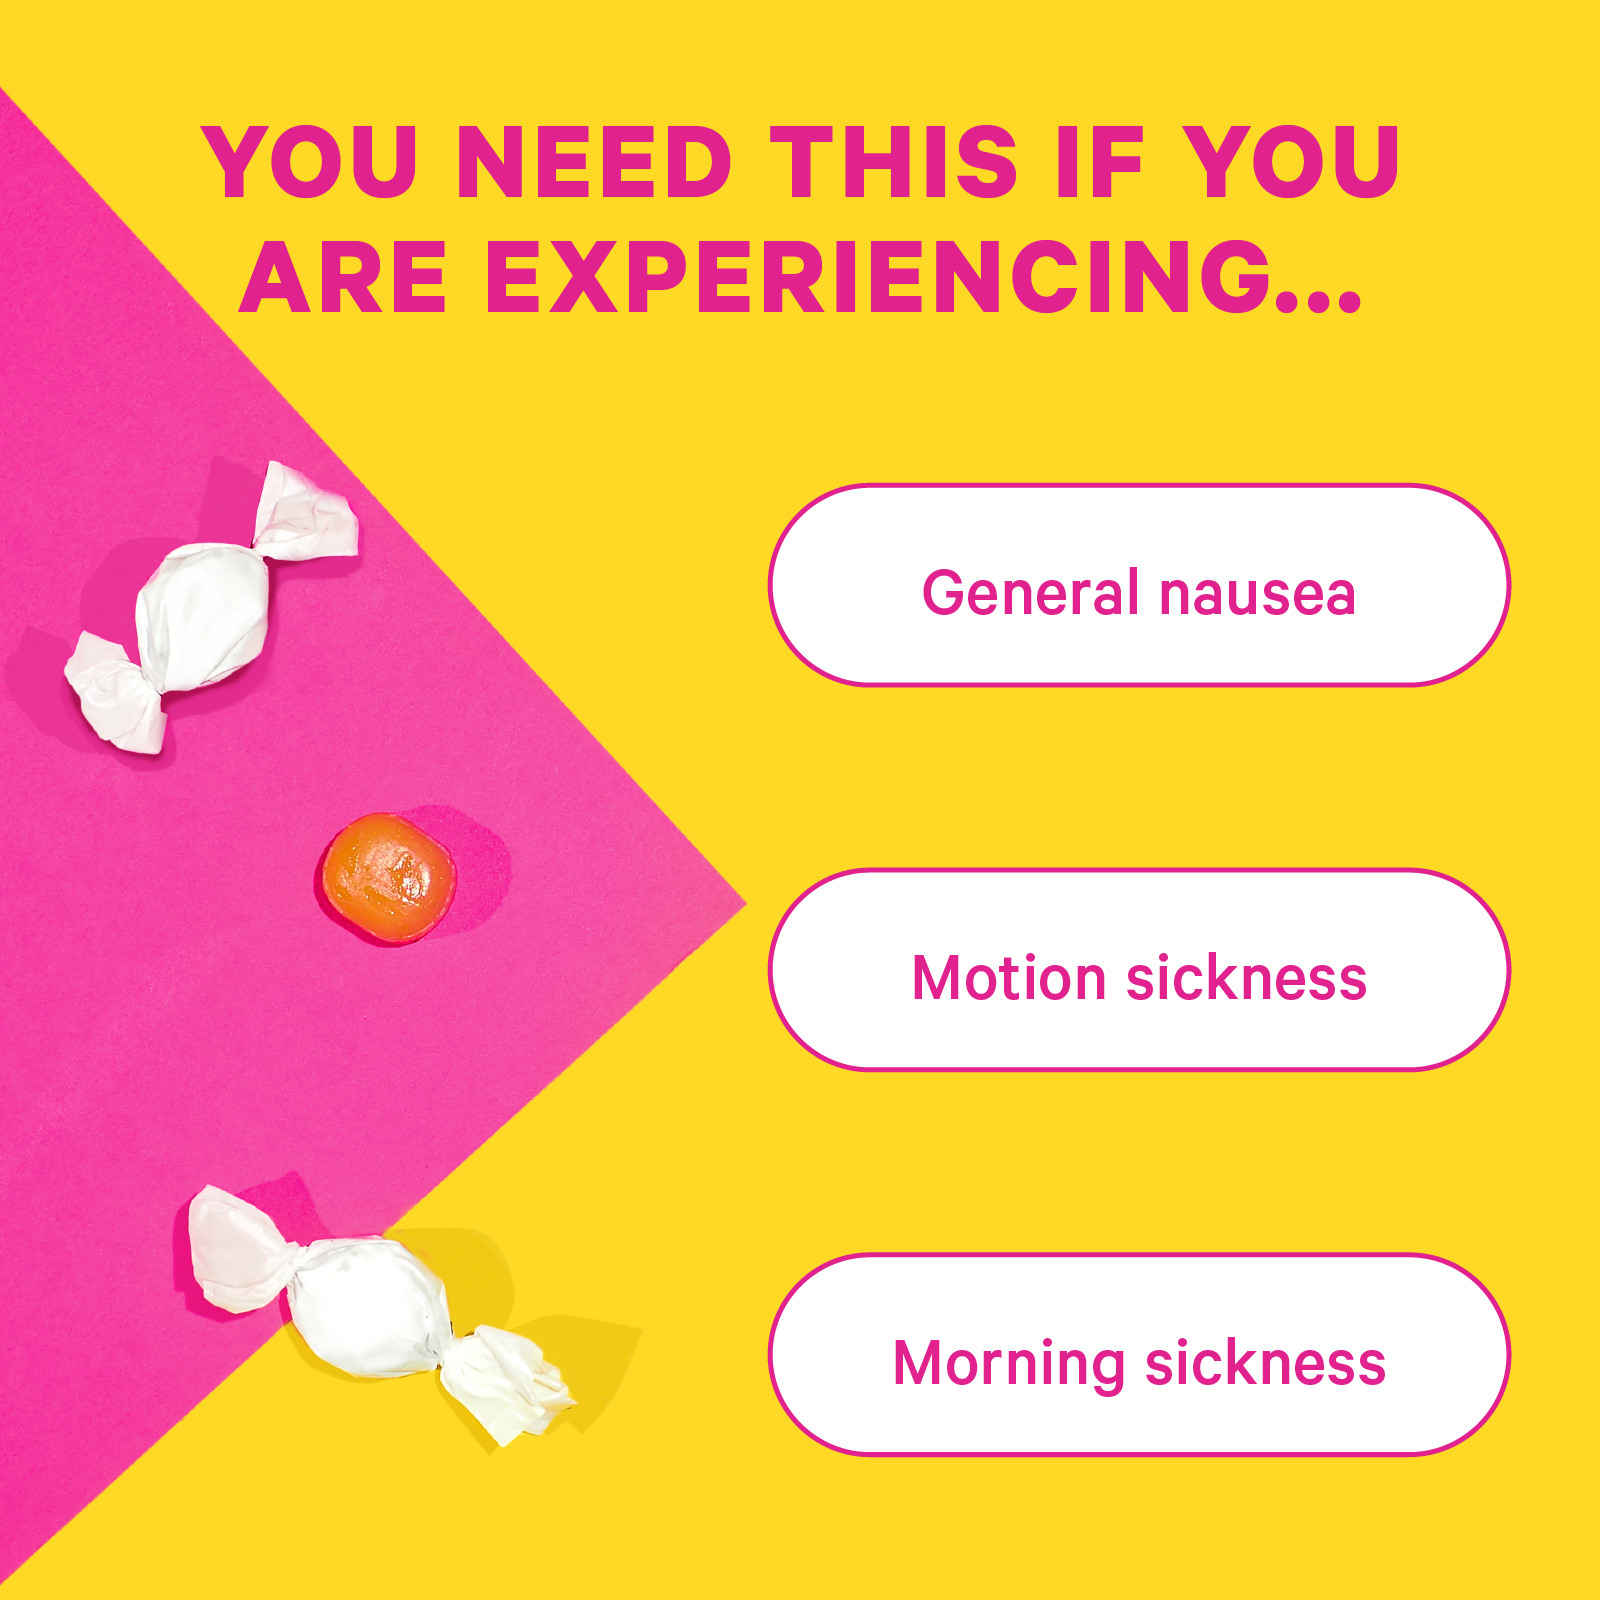 Pink Stork Nausea Sweets: Nausea Relief + Morning Sickness Relief for Pregnancy, Vitamin B6 + Peppermint, 20 Lozenges - image 2 of 6